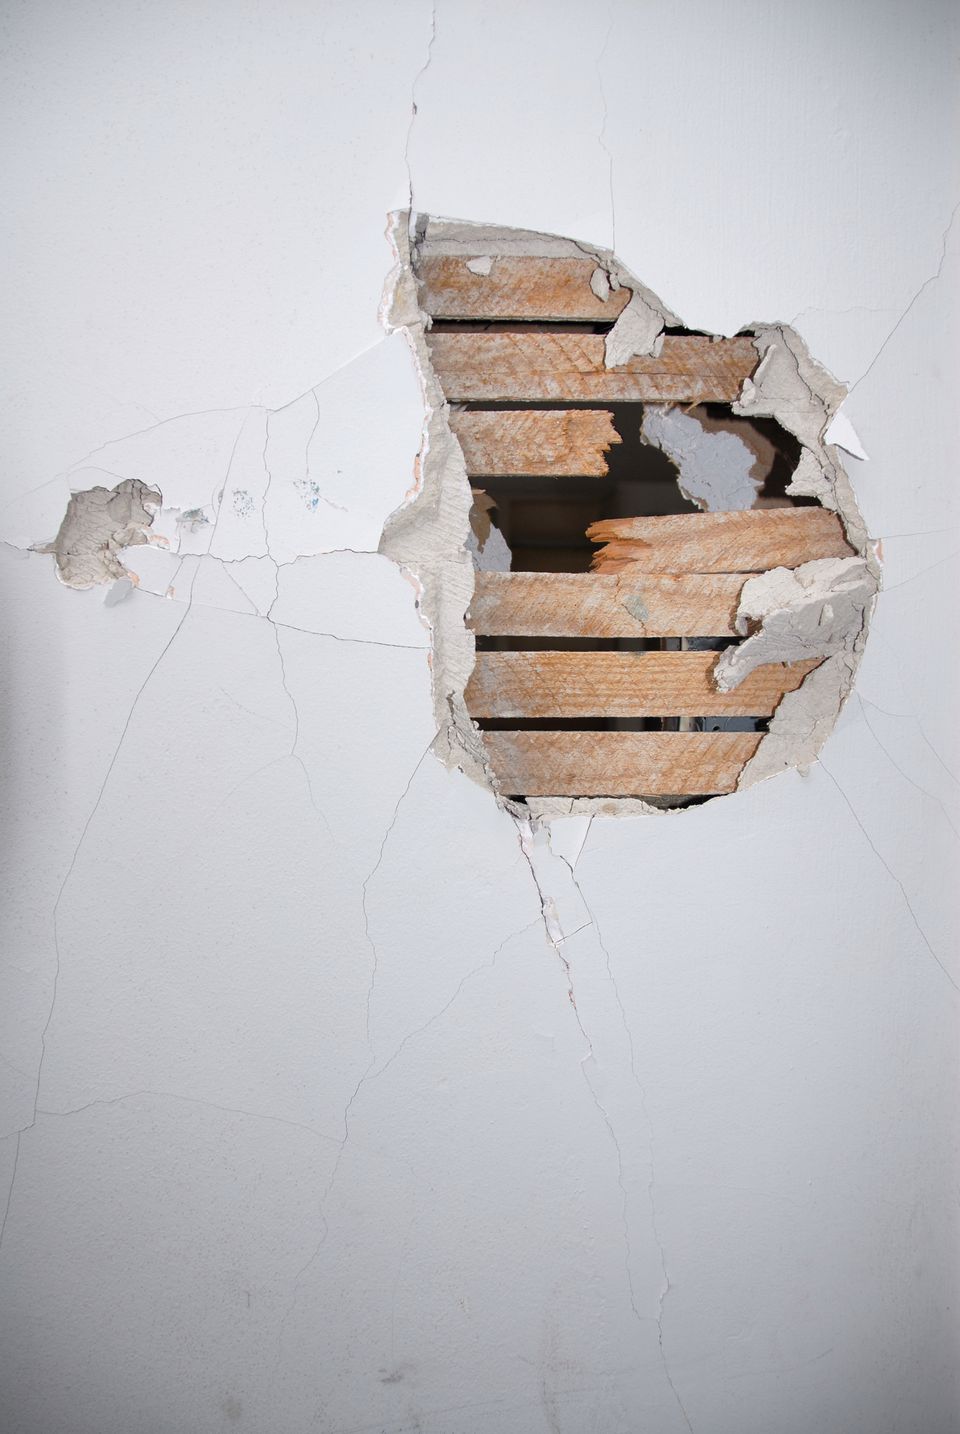 How to Fix a Small Hole in Drywall Step by Step